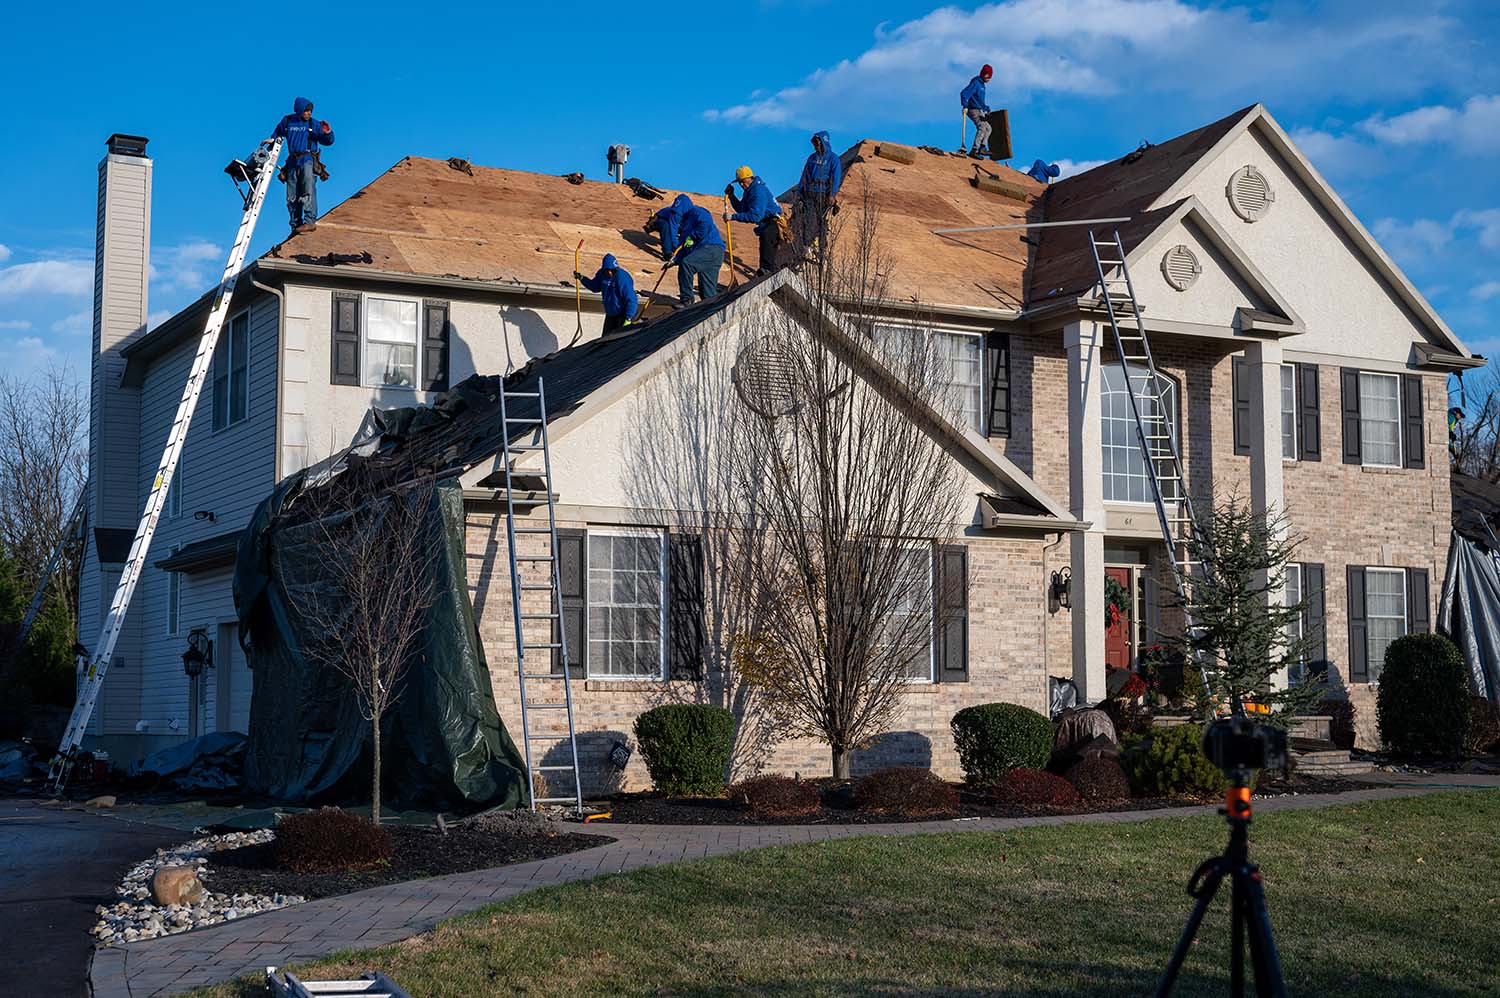 Roofing repair company - residential roofing contractors in Evesham (medium image)